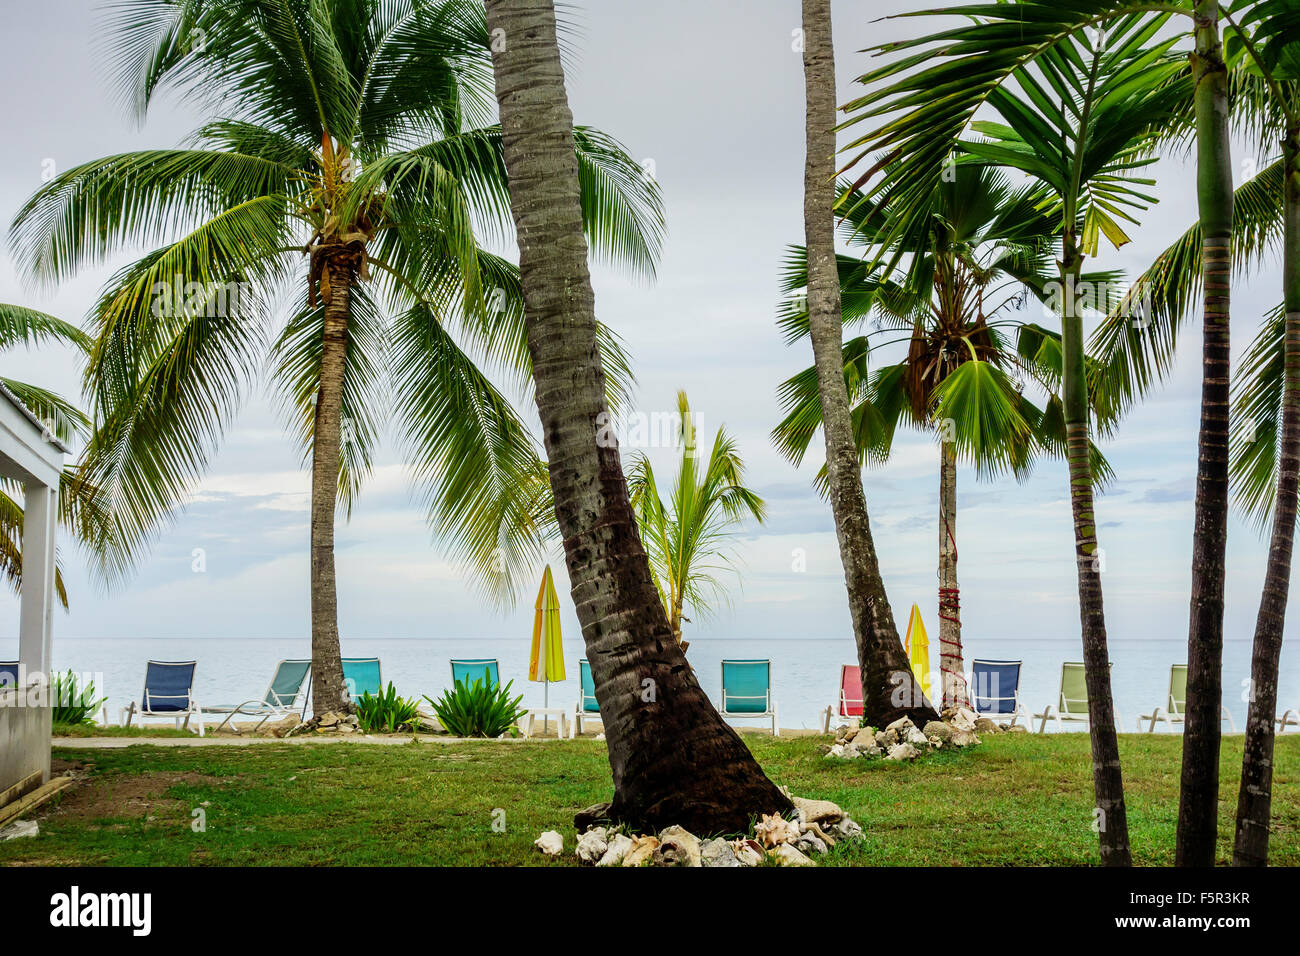 Coconut palm trees at a beachside resort on the Caribbean island of St. Croix, U.S. Virgin Islands. Stock Photo